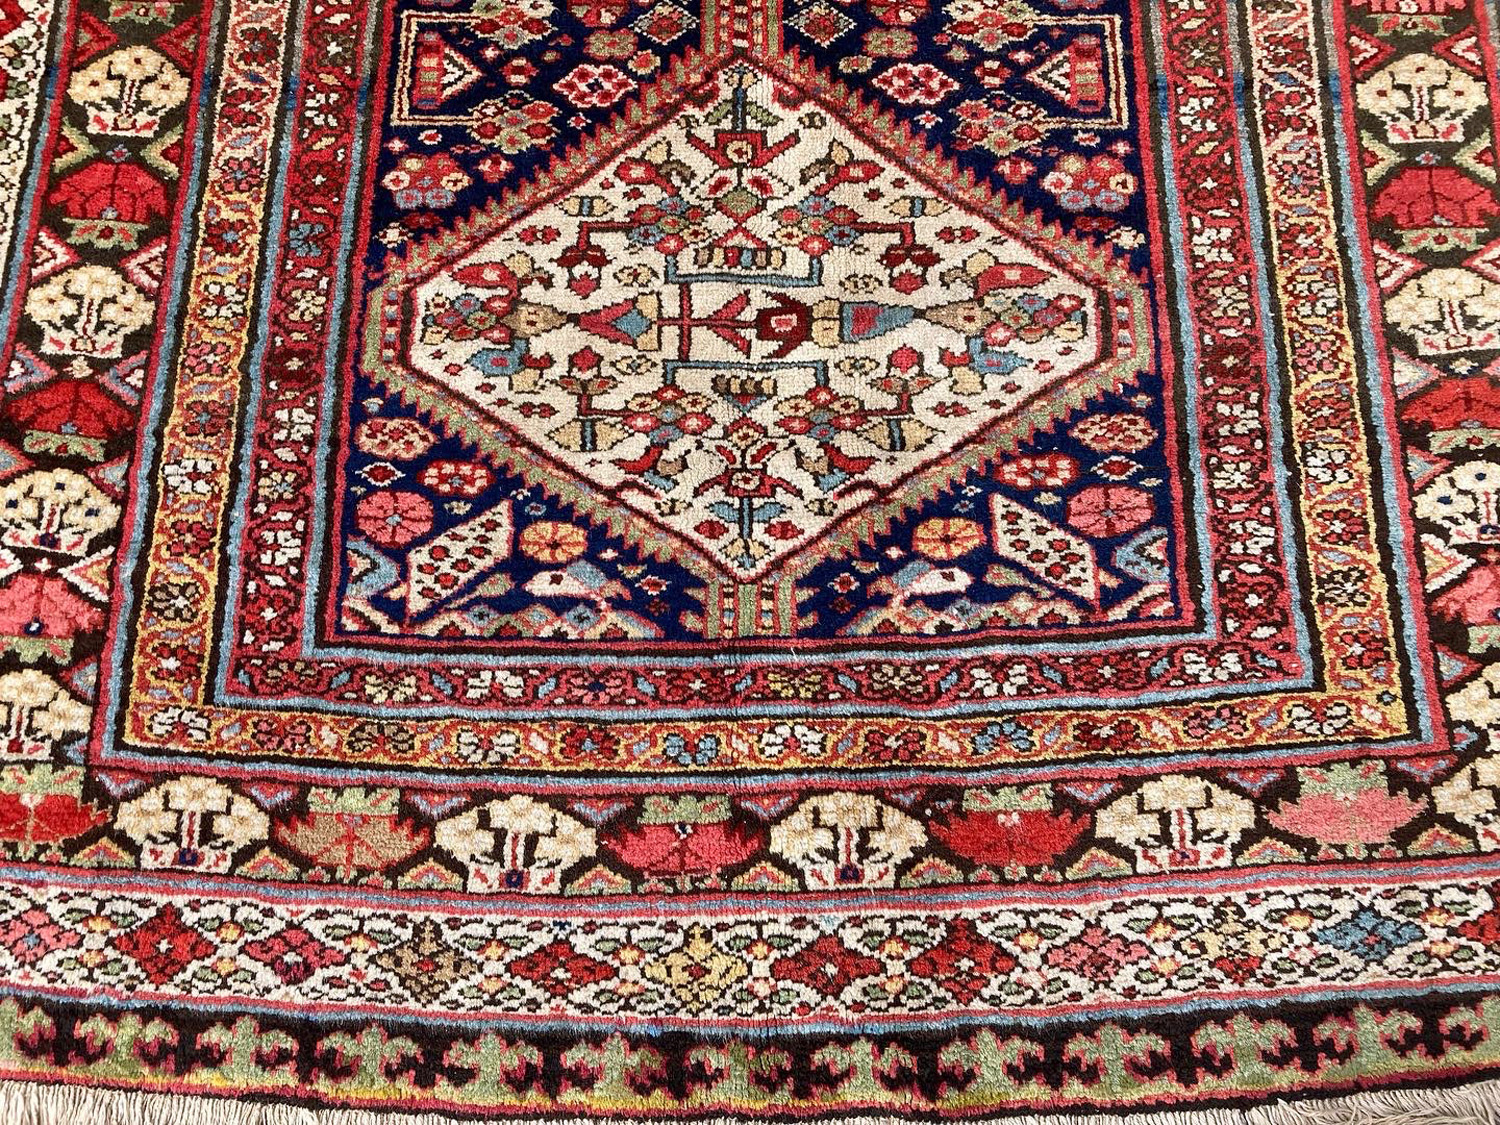 Field, border and medallion detail from an antique northwest Persian rug with a navy field and ivory and brick red borders, Douglas Stock Gallery, antique gallery carpet, antique wide runner rug, antique kelley carpet, antique Oriental rugs Boston,MA area